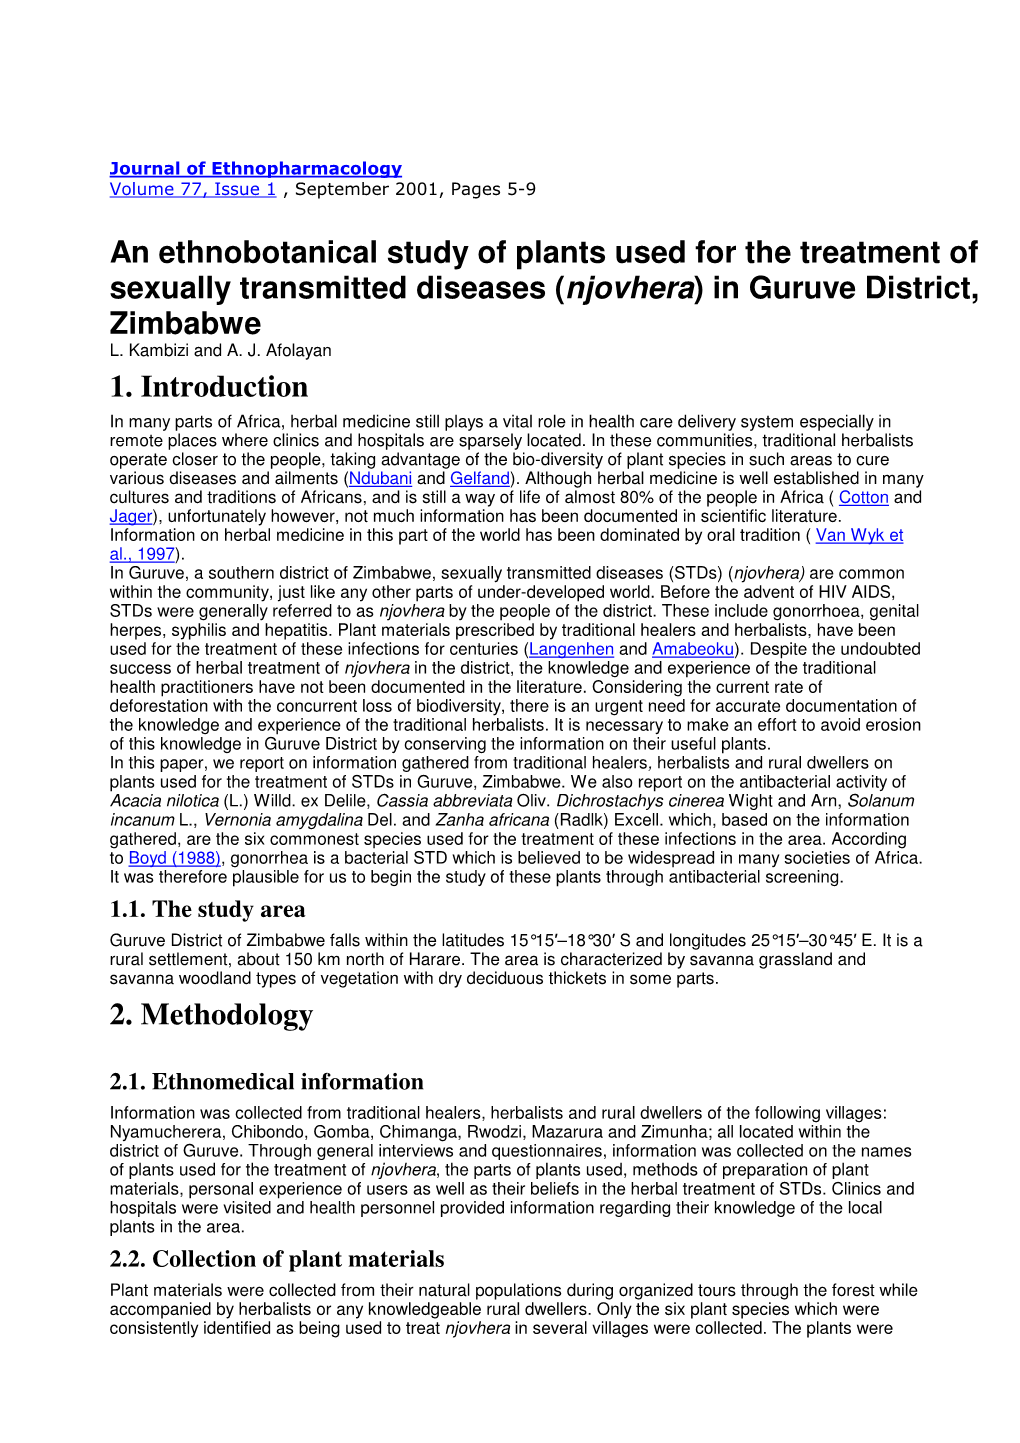 An Ethnobotanical Study of Plants Used for the Treatment of Sexually Transmitted Diseases ( Njovhera ) in Guruve District, Zimbabwe L